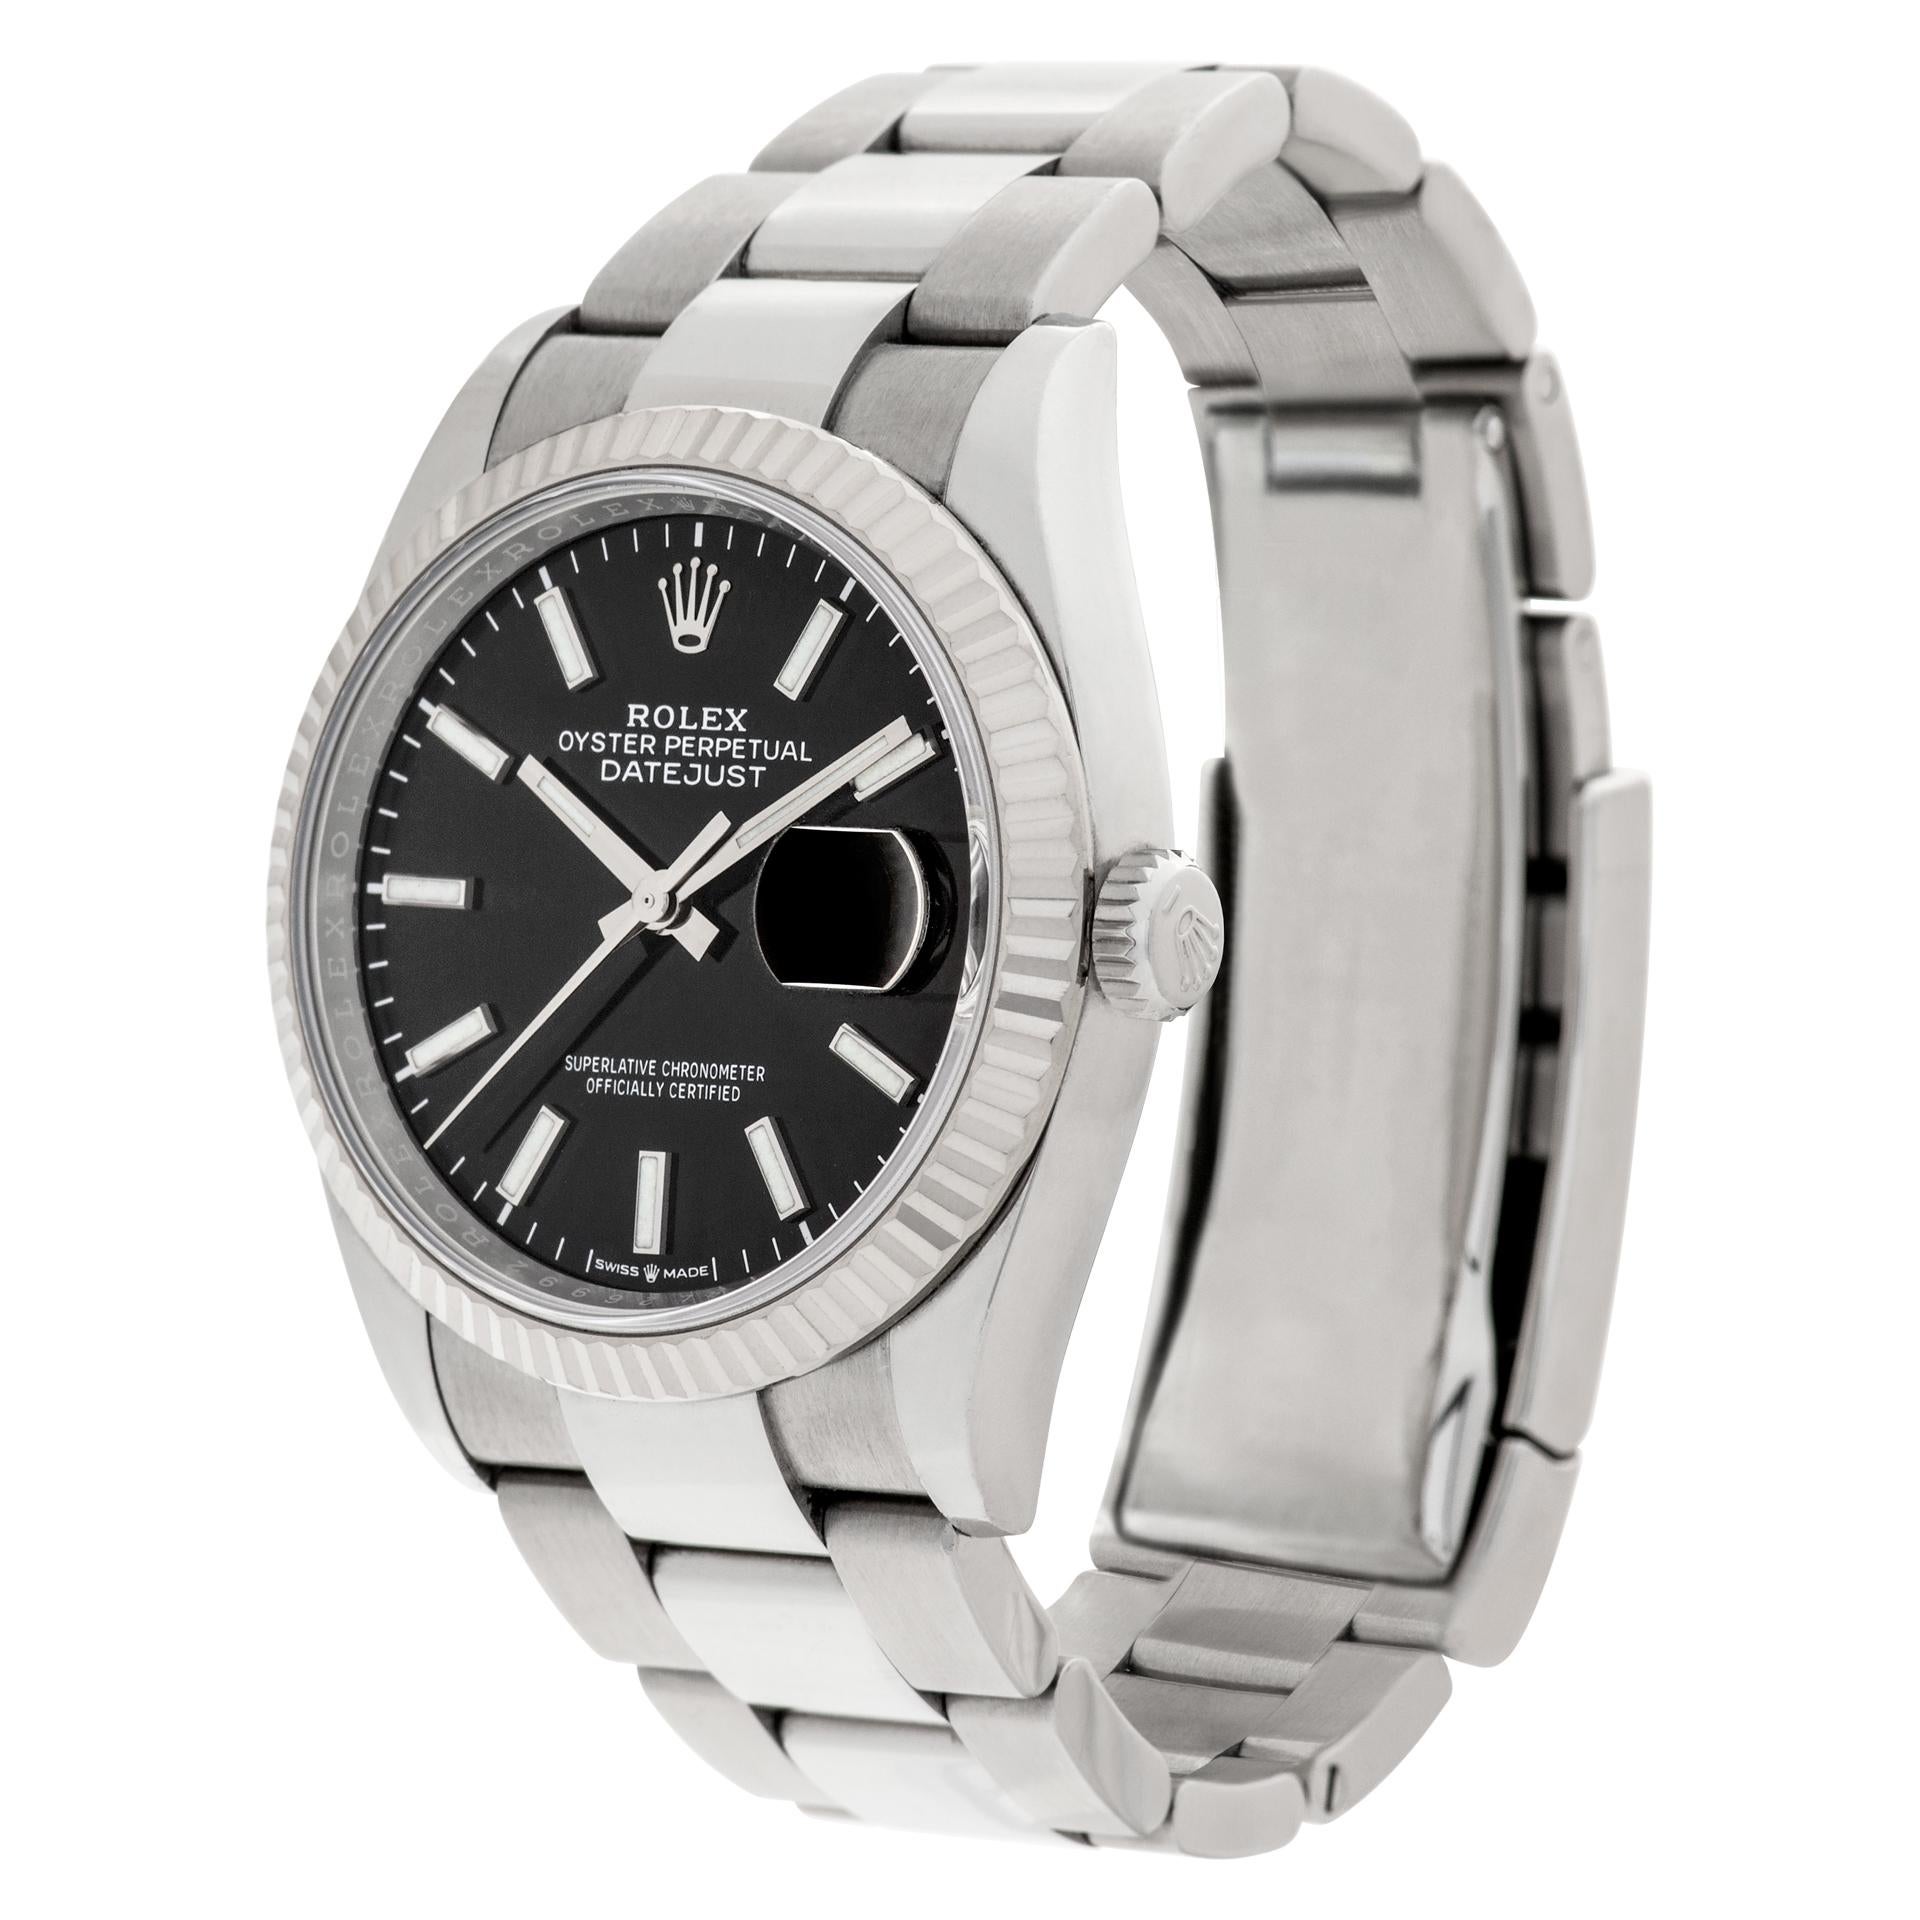 Rolex Datejust in stainless steel with 18k white gold fluted bezel. Auto w/ sweep seconds and date. 36 mm case size.  Ref 126234. Circa 2020s. Fine Pre-owned Rolex Watch.

Certified preowned Classic Rolex Datejust 126234 watch is made out of